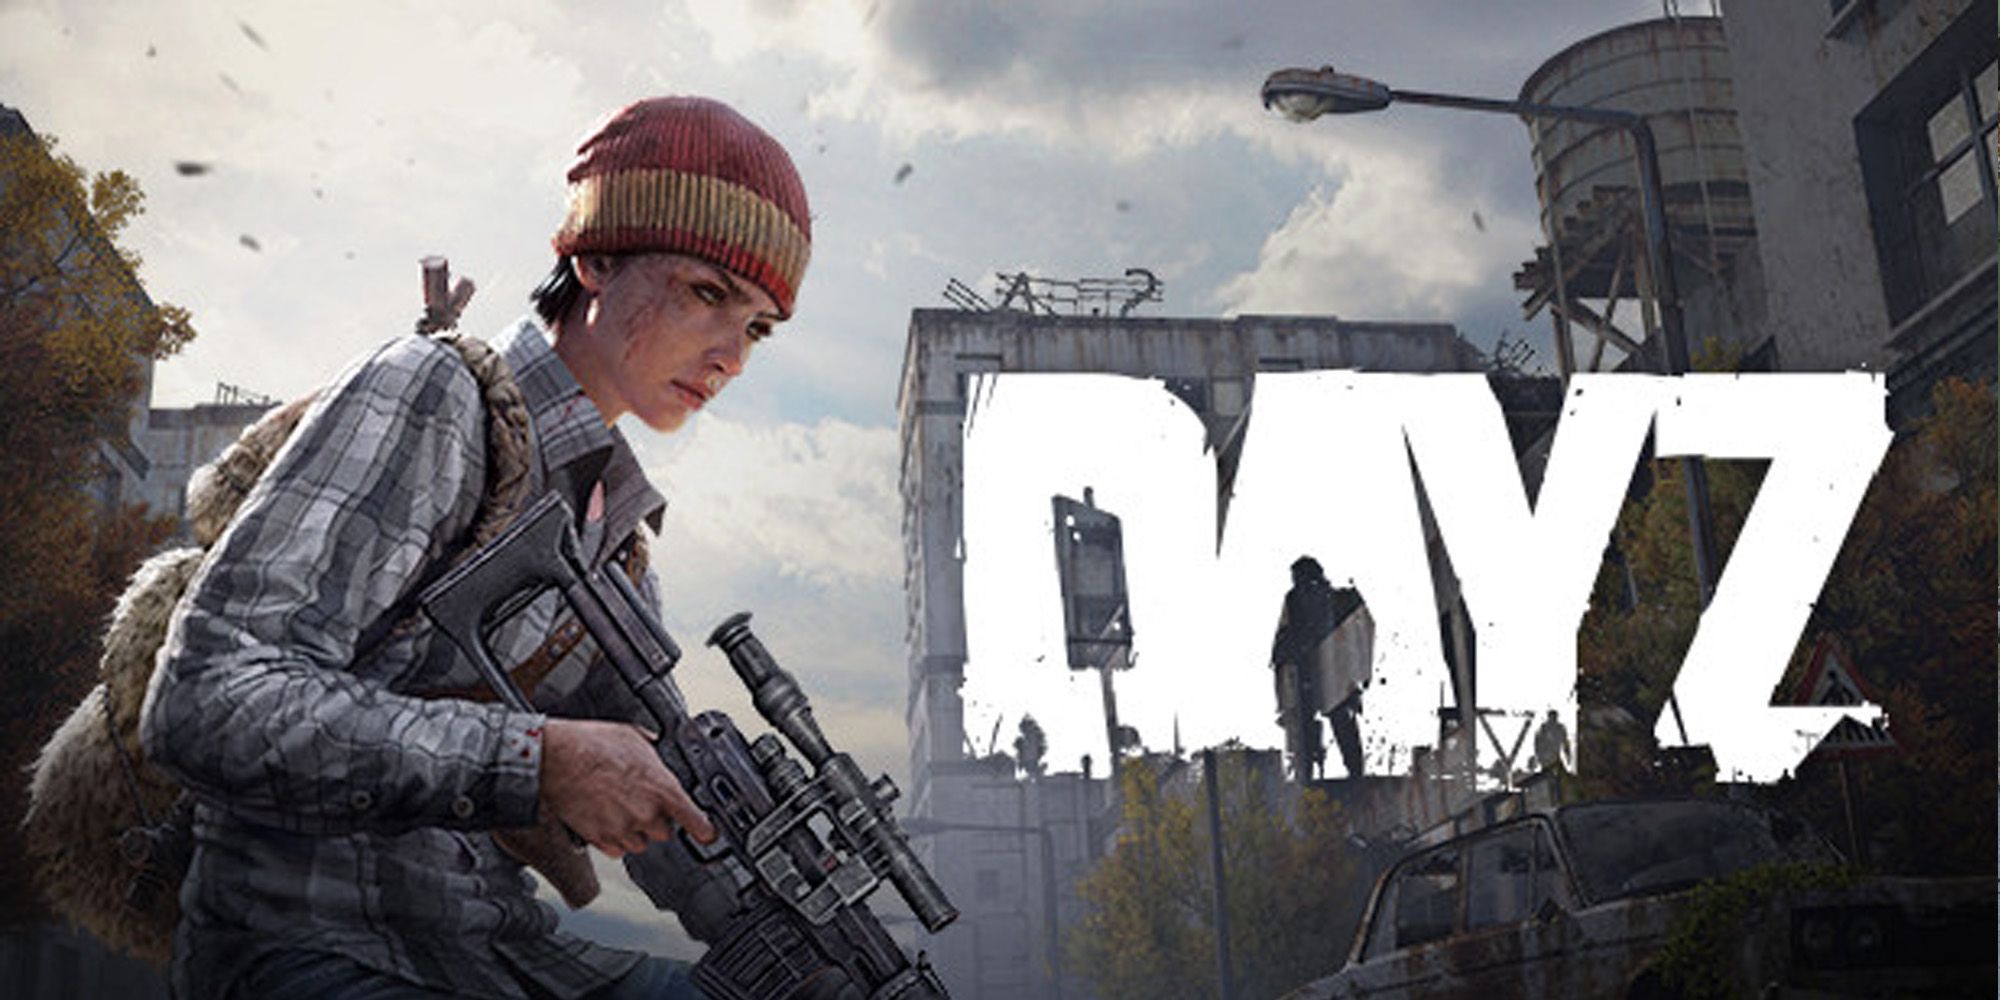 Dayz M24, Any weapons from ArmA 2 or Dayz you want me to bu…